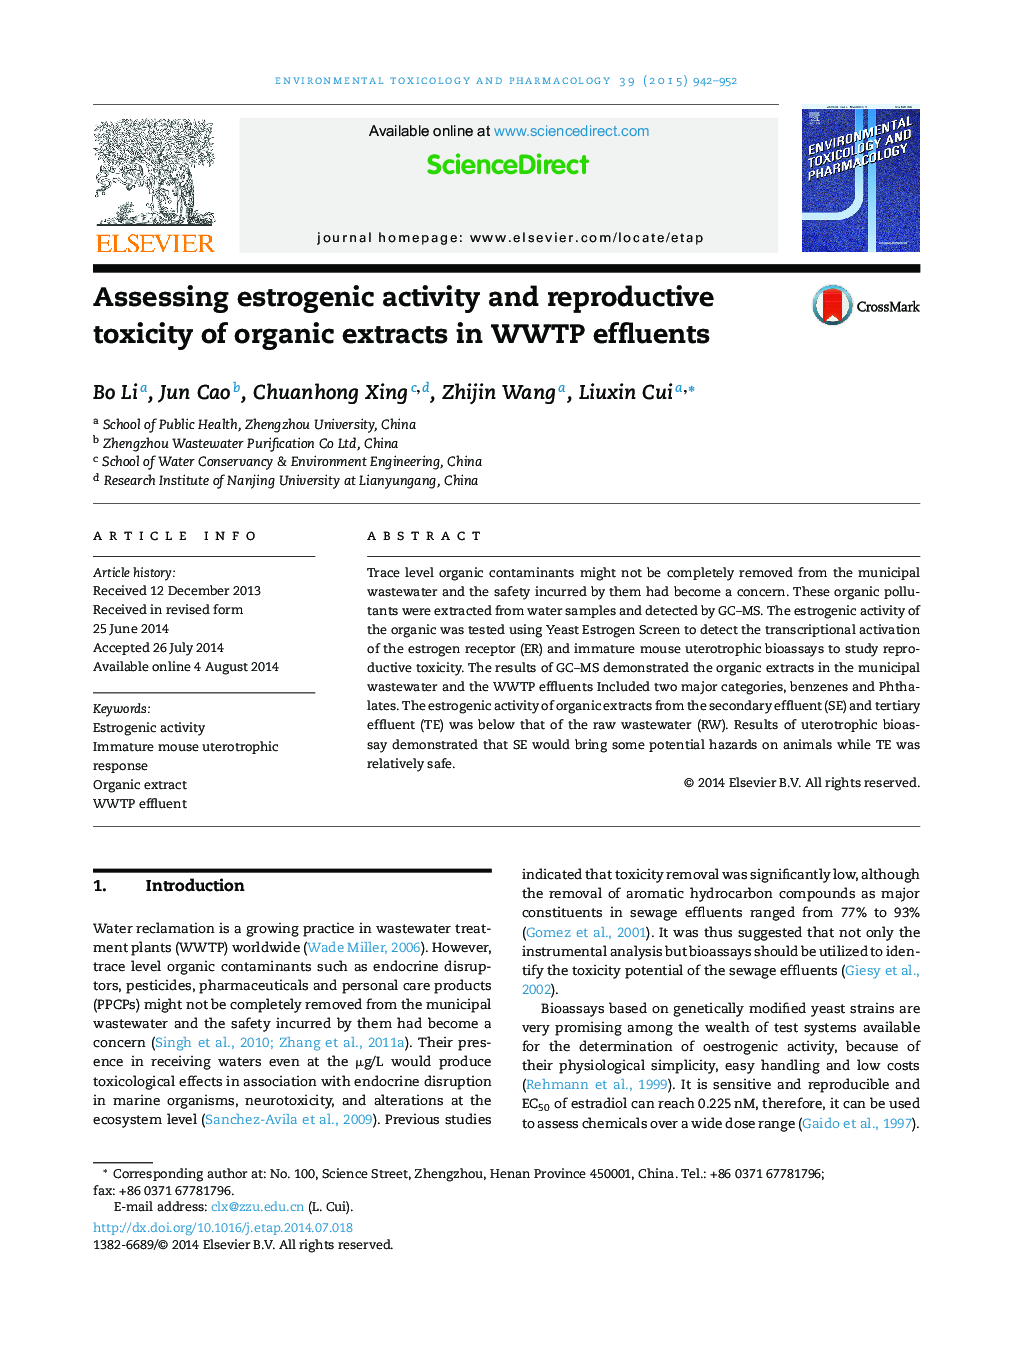 Assessing estrogenic activity and reproductive toxicity of organic extracts in WWTP effluents